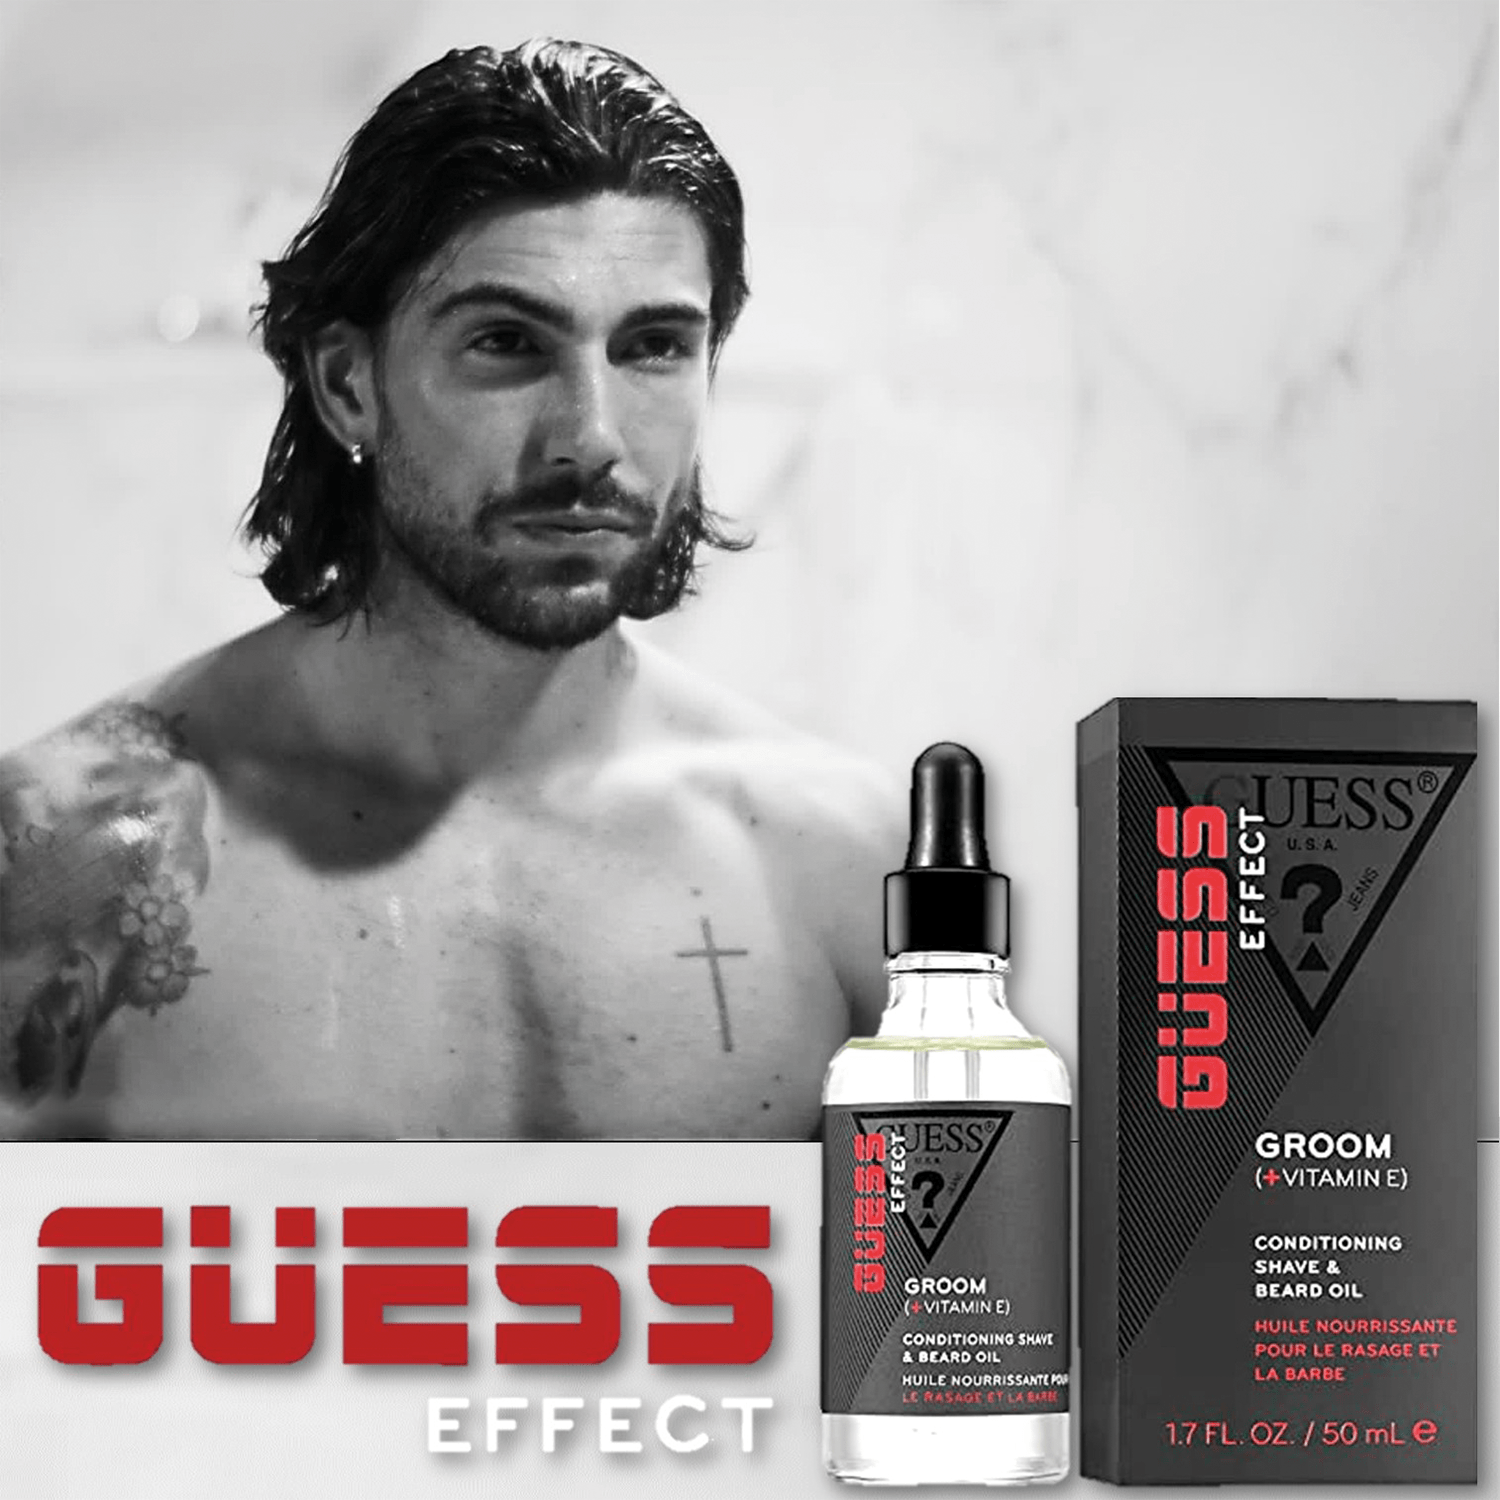 Guess Effect Groom Conditioning Shave & Beard Oil | My Perfume Shop Australia